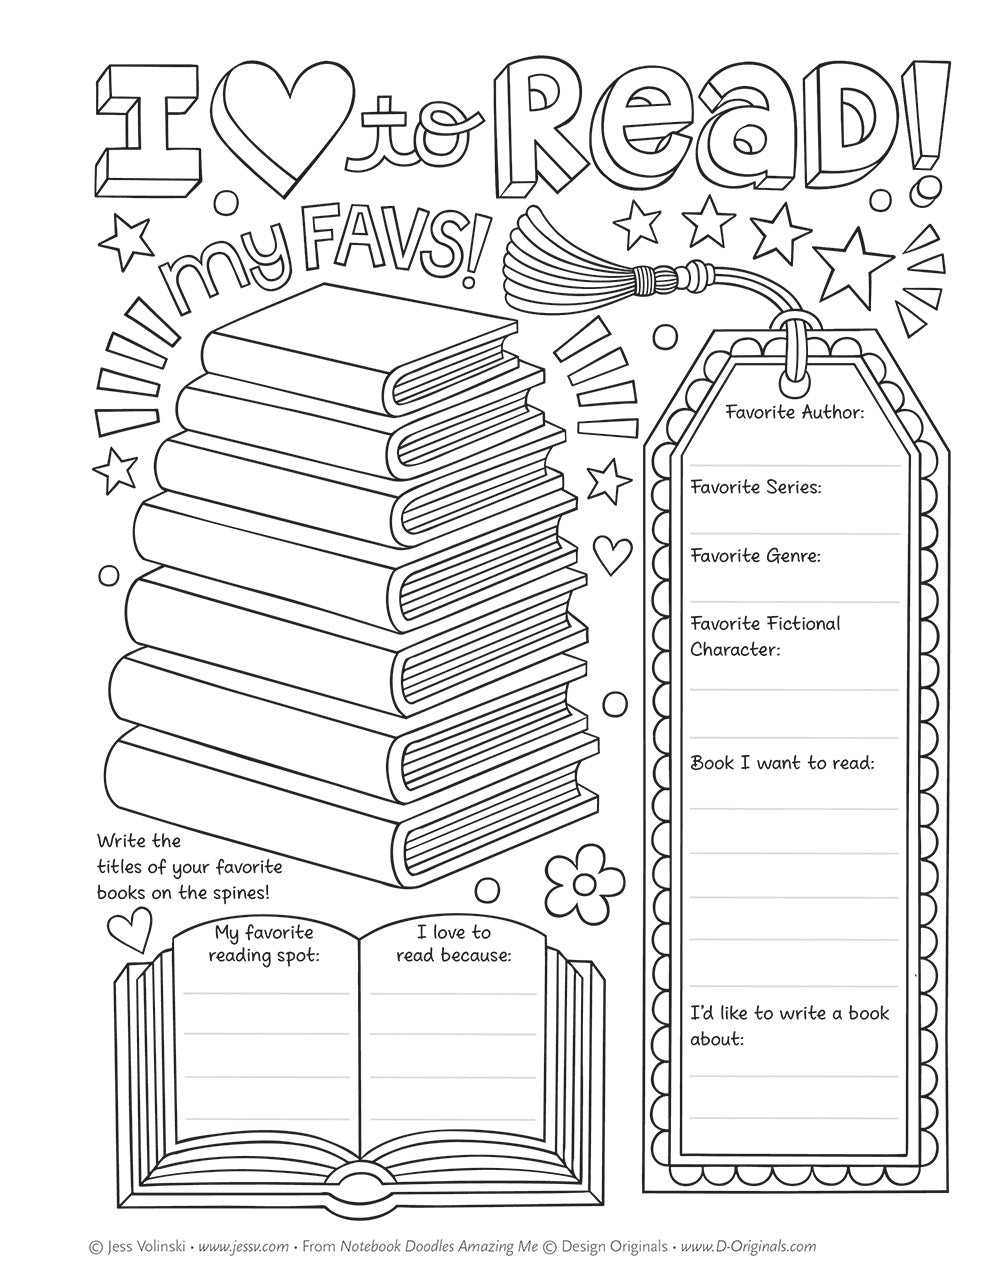 Design Originals Notebook Doodles Amazing Me - Customized Coloring Book  Personalized with Name and a Special Note from You to Make a Thoughtful  Gift